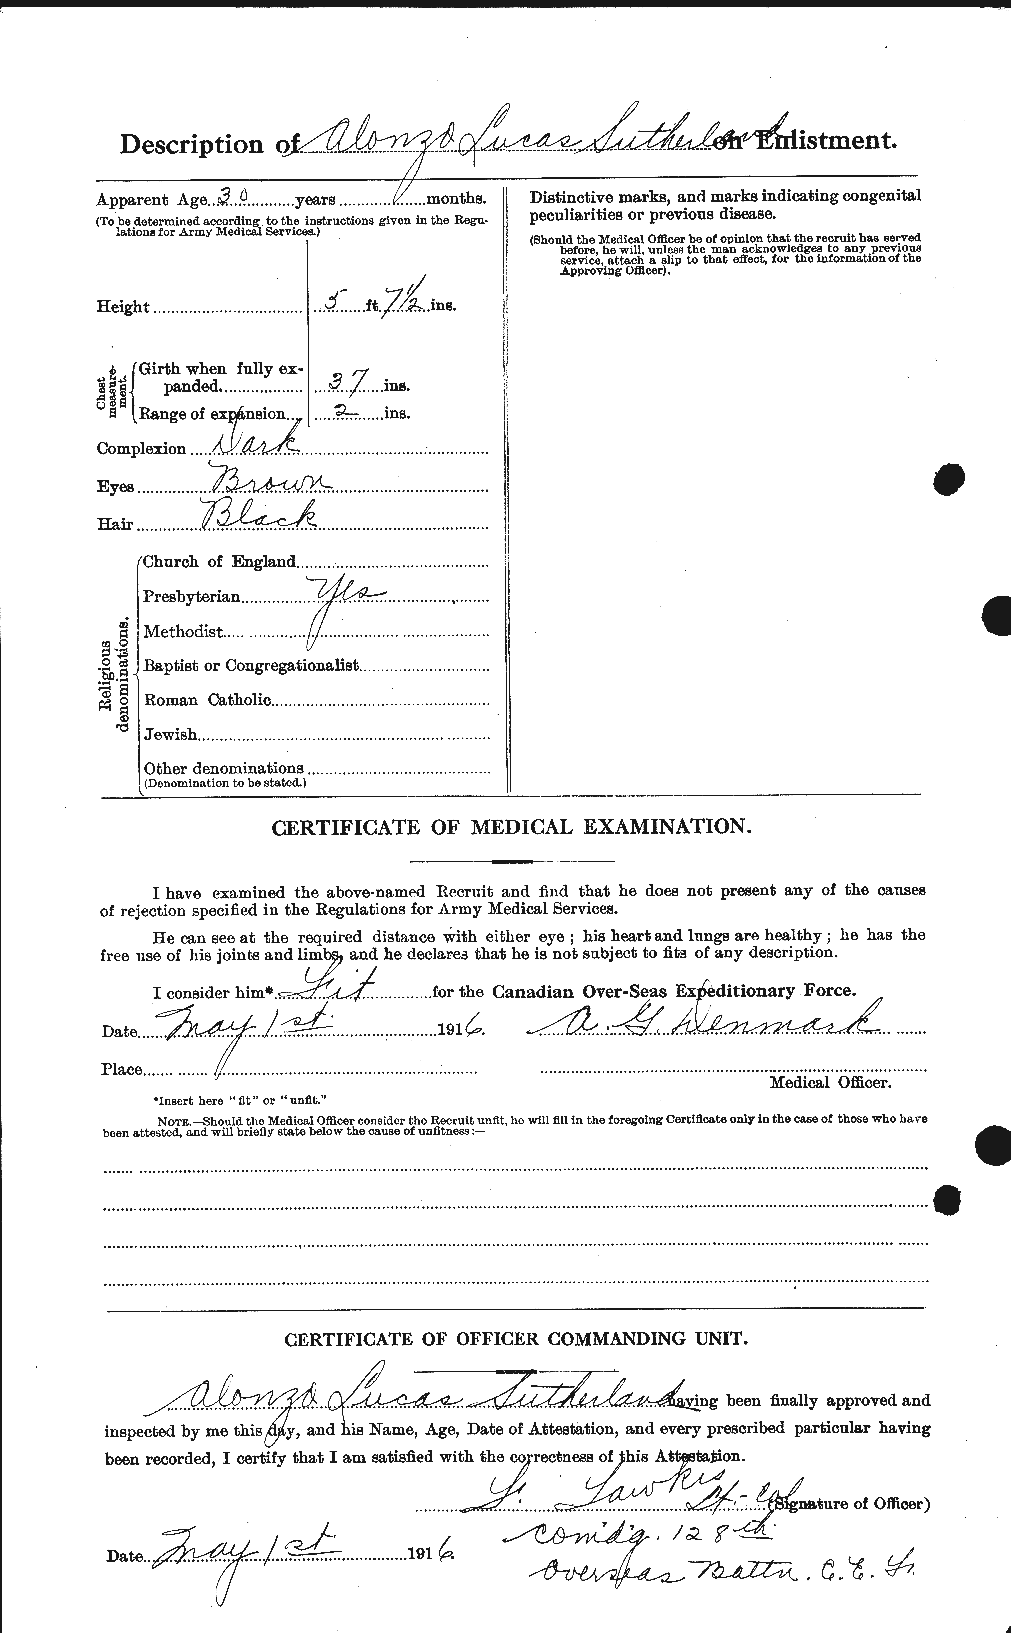 Personnel Records of the First World War - CEF 125333b